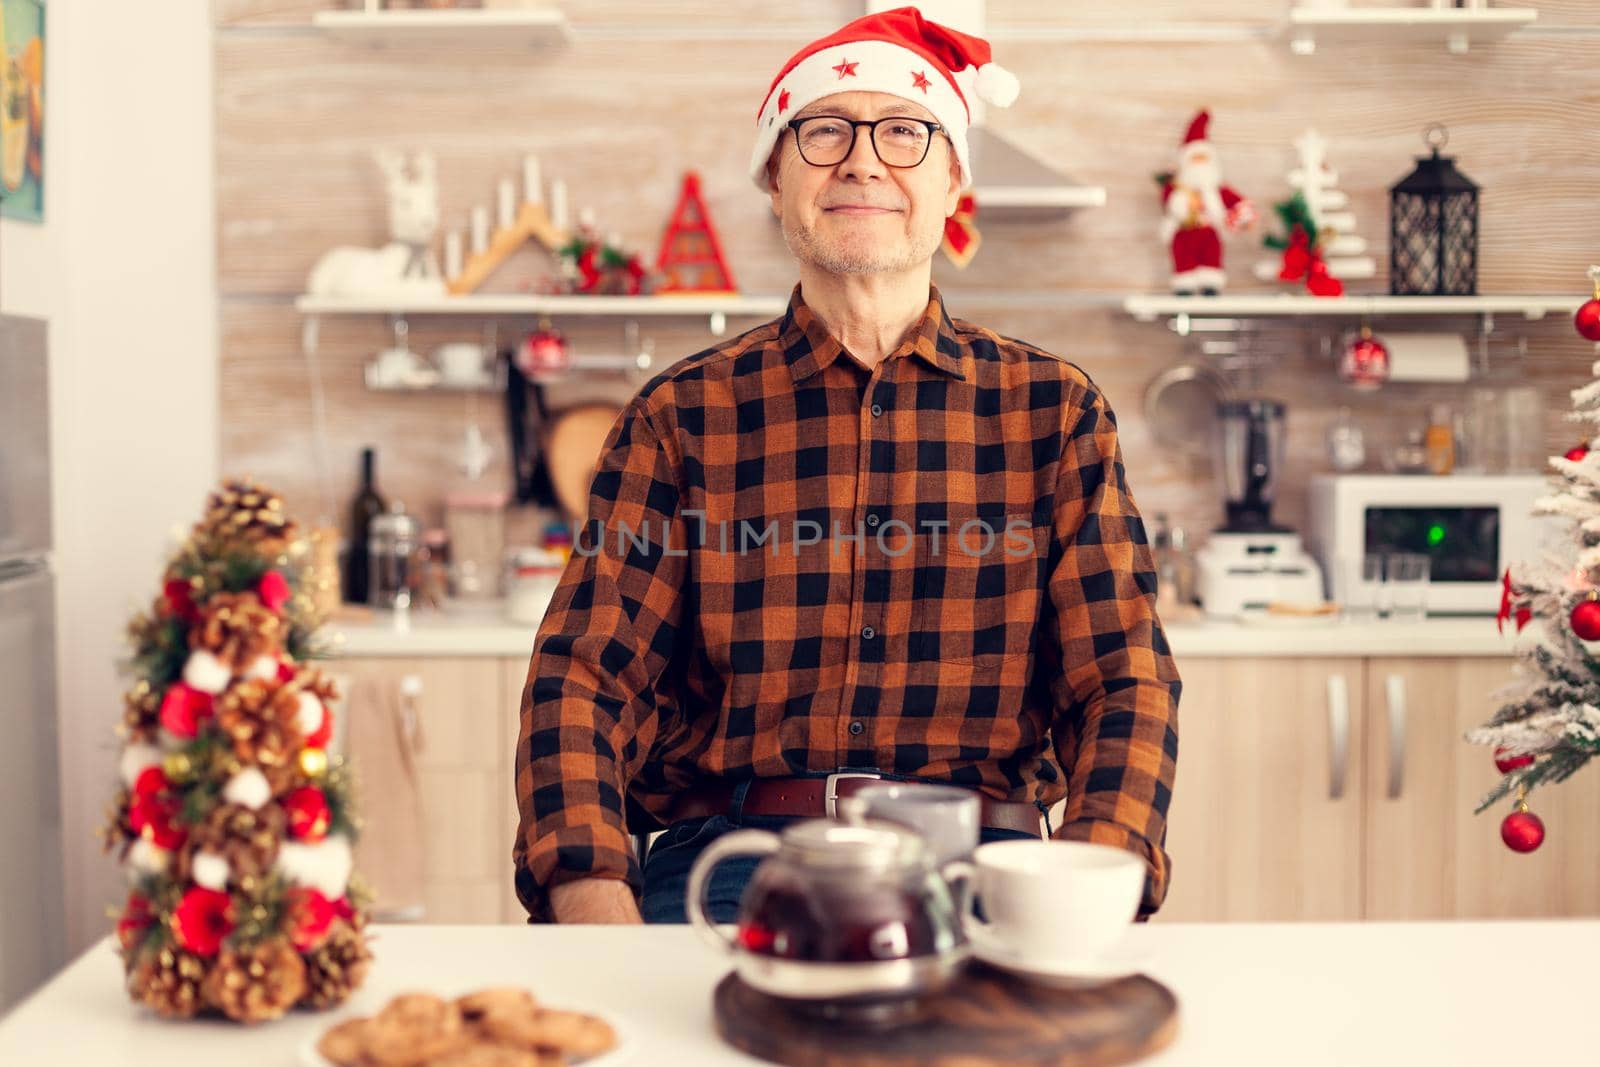 Happy old man with gray hair celebrating christmas wearing santa hat enjoying delicious cookies. Cheerful senior man in home kitchen with winter holiday decoration and tasty biscuits.